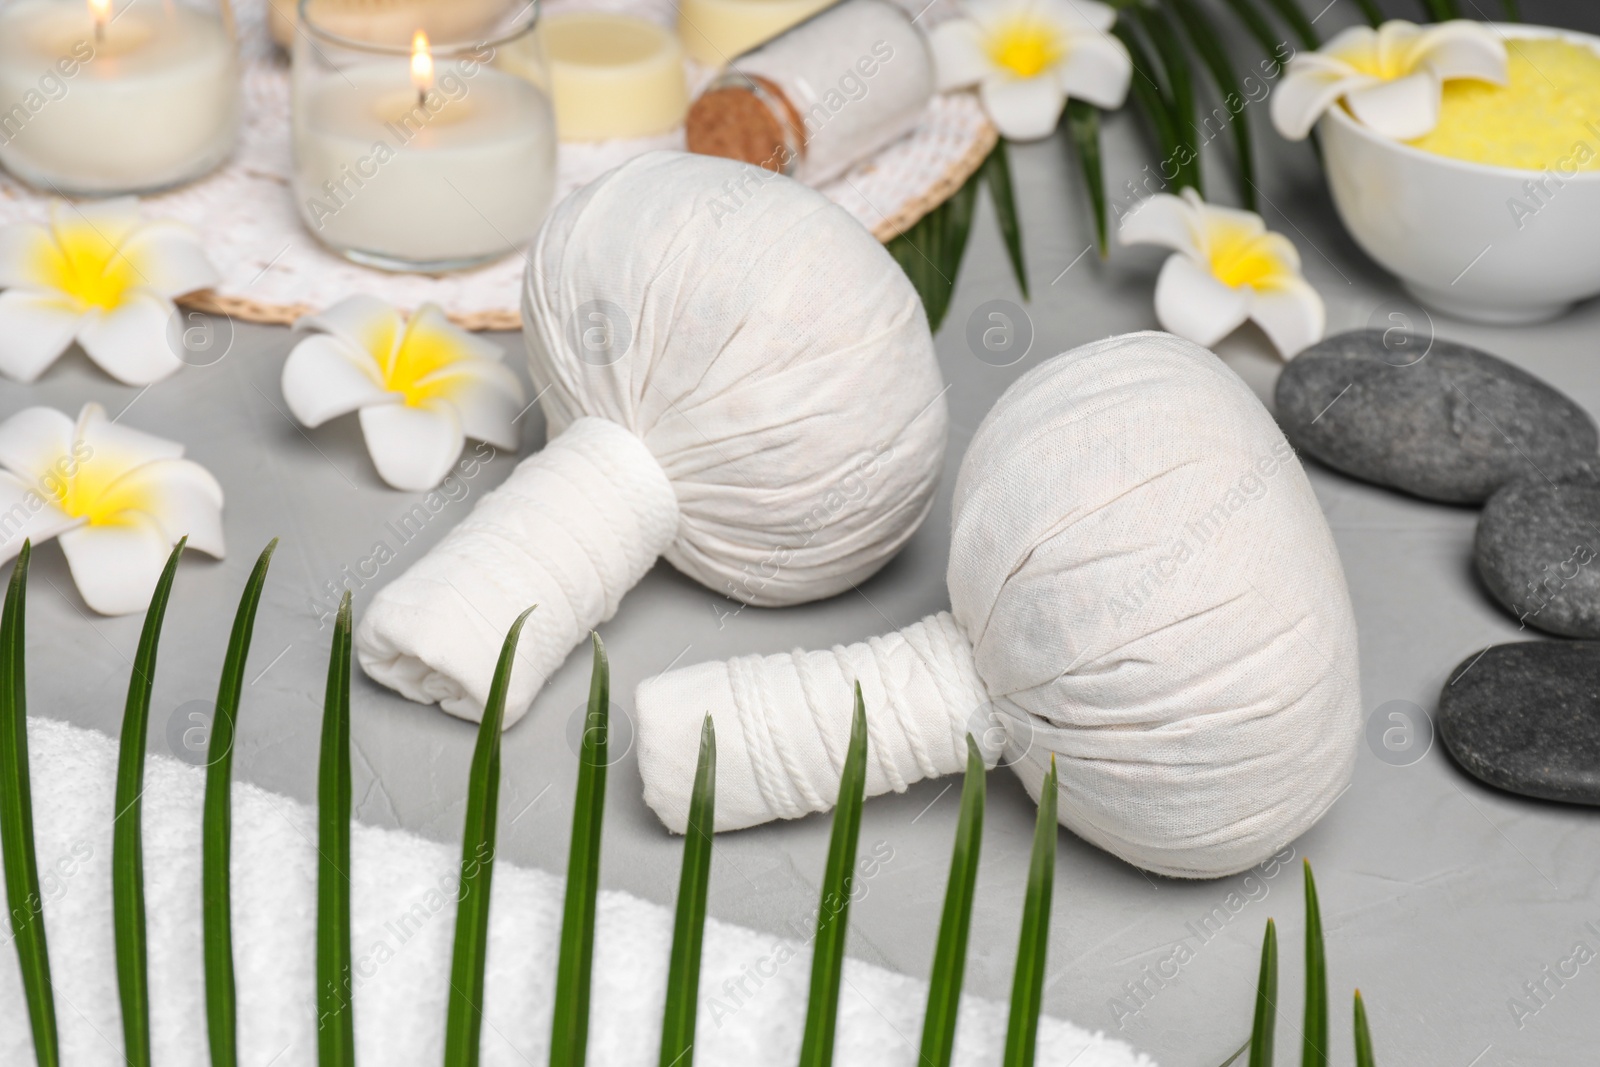 Photo of Spa bags, stones and orchid flowers on light gray table